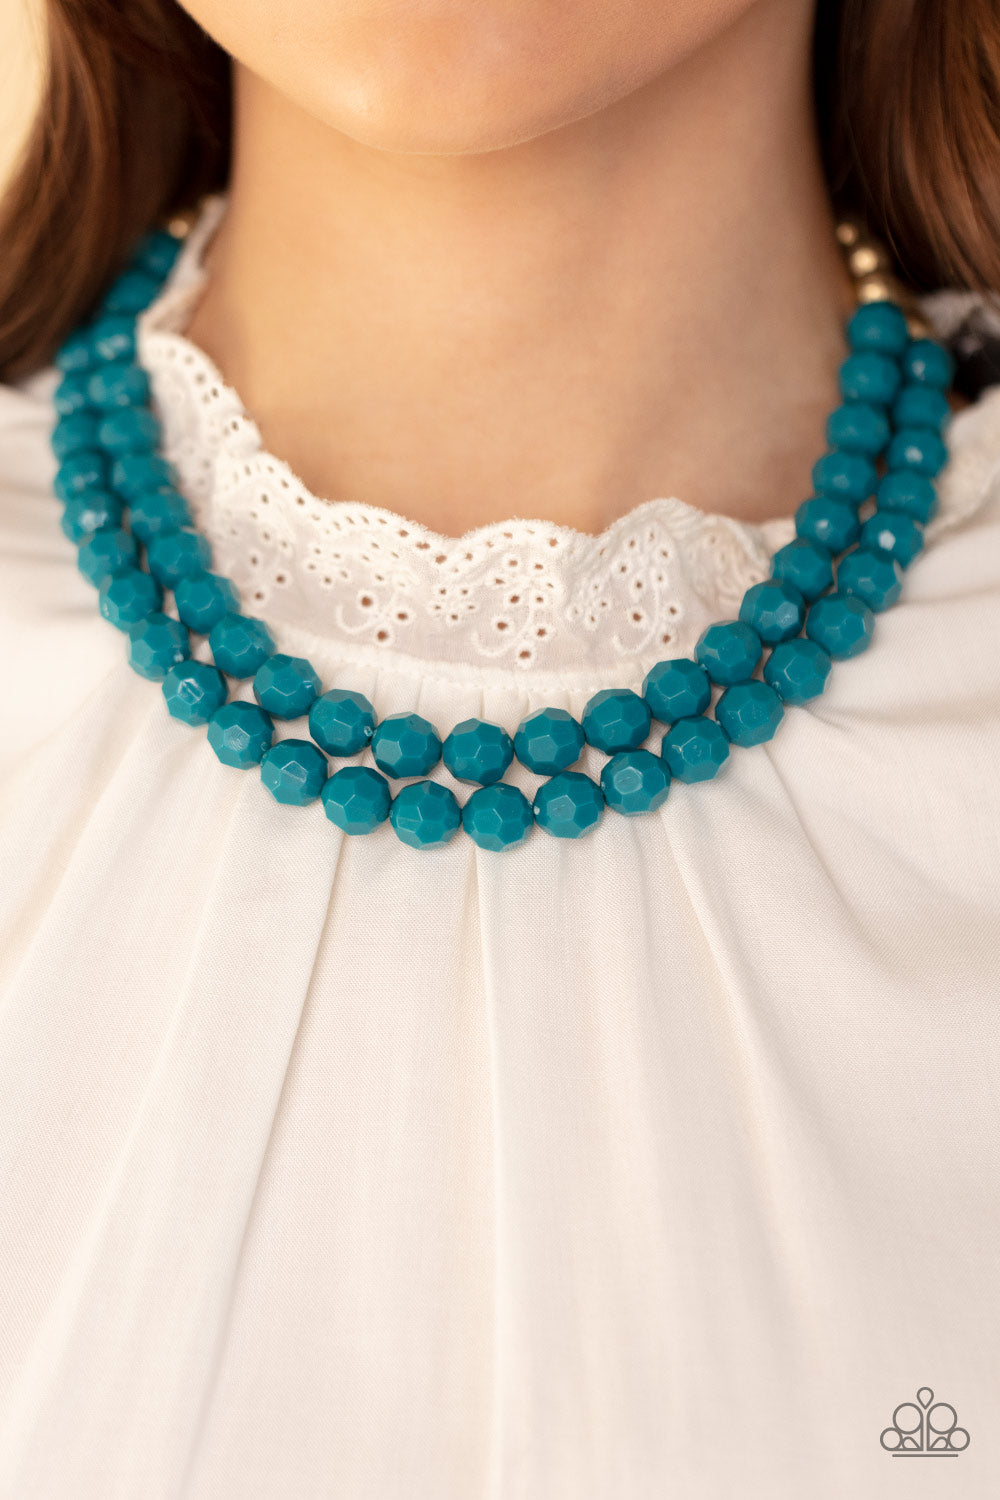 Greco Getaway - Blue Necklace-Paparazzi Jewelry Images